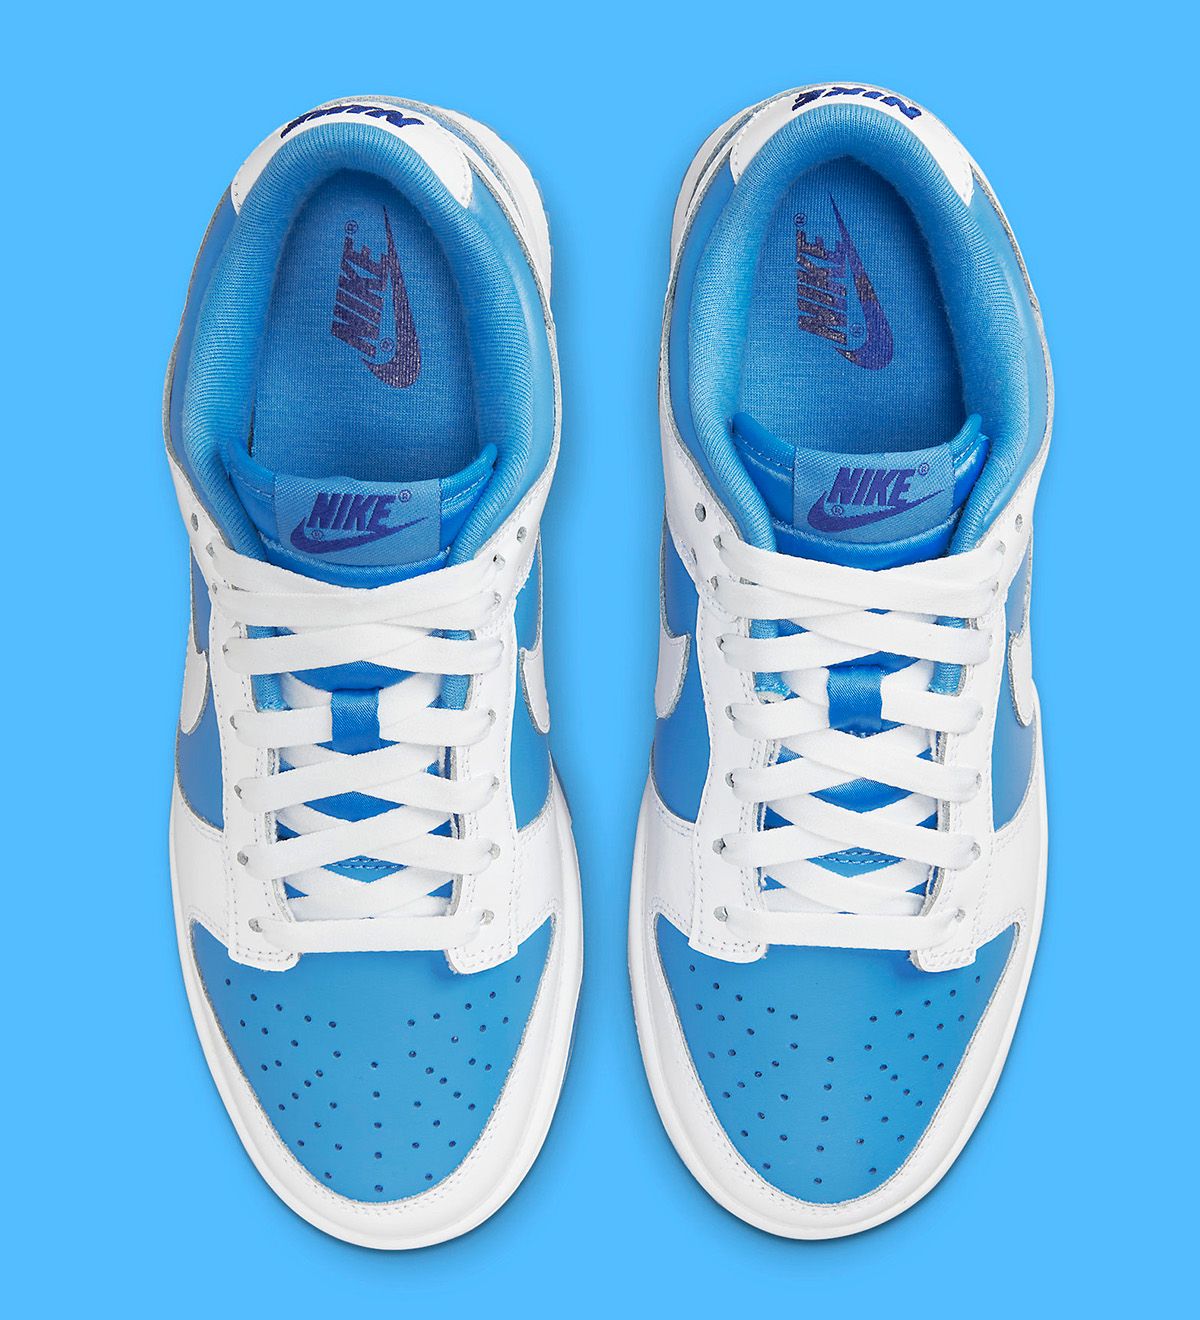 First unc nike dunks Looks // Nike Dunk Low "Reverse UNC" | HOUSE OF HEAT